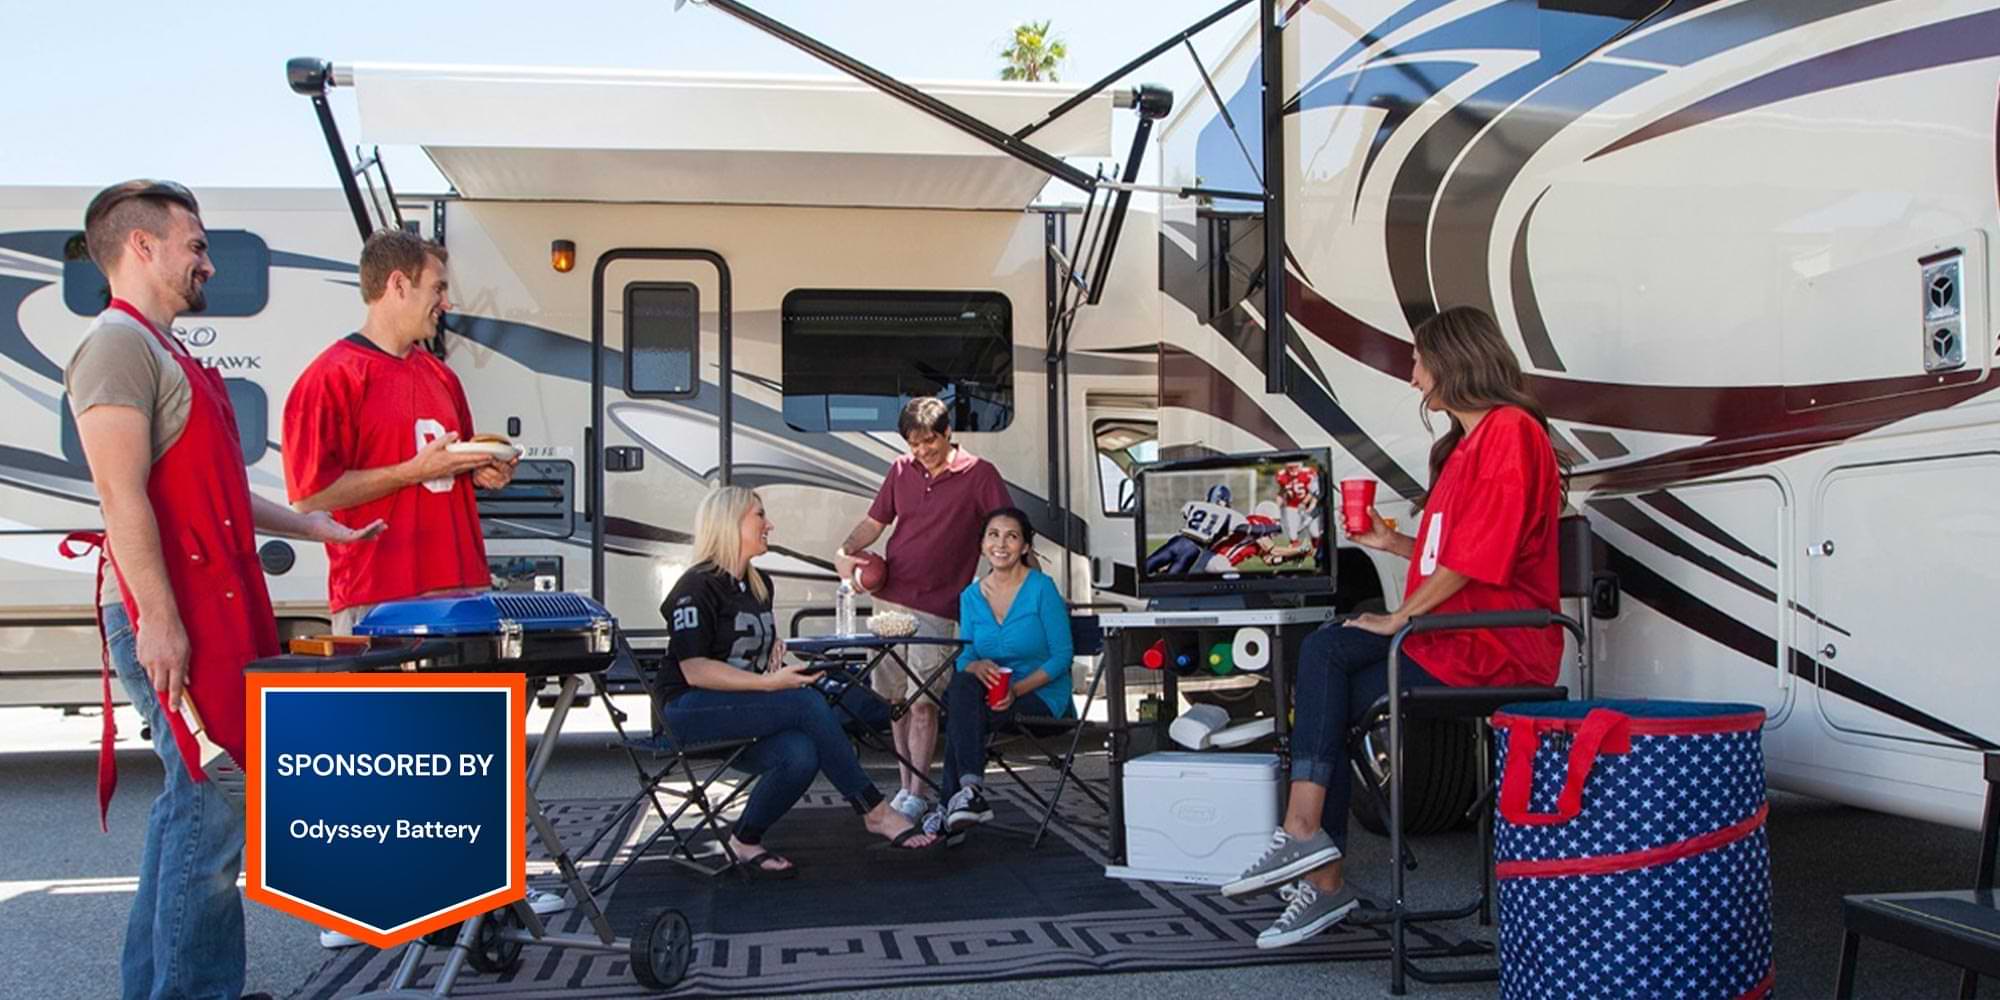 a group of people enjoy a football game on a portable television while grilling and relaxing in front of two camped RVs